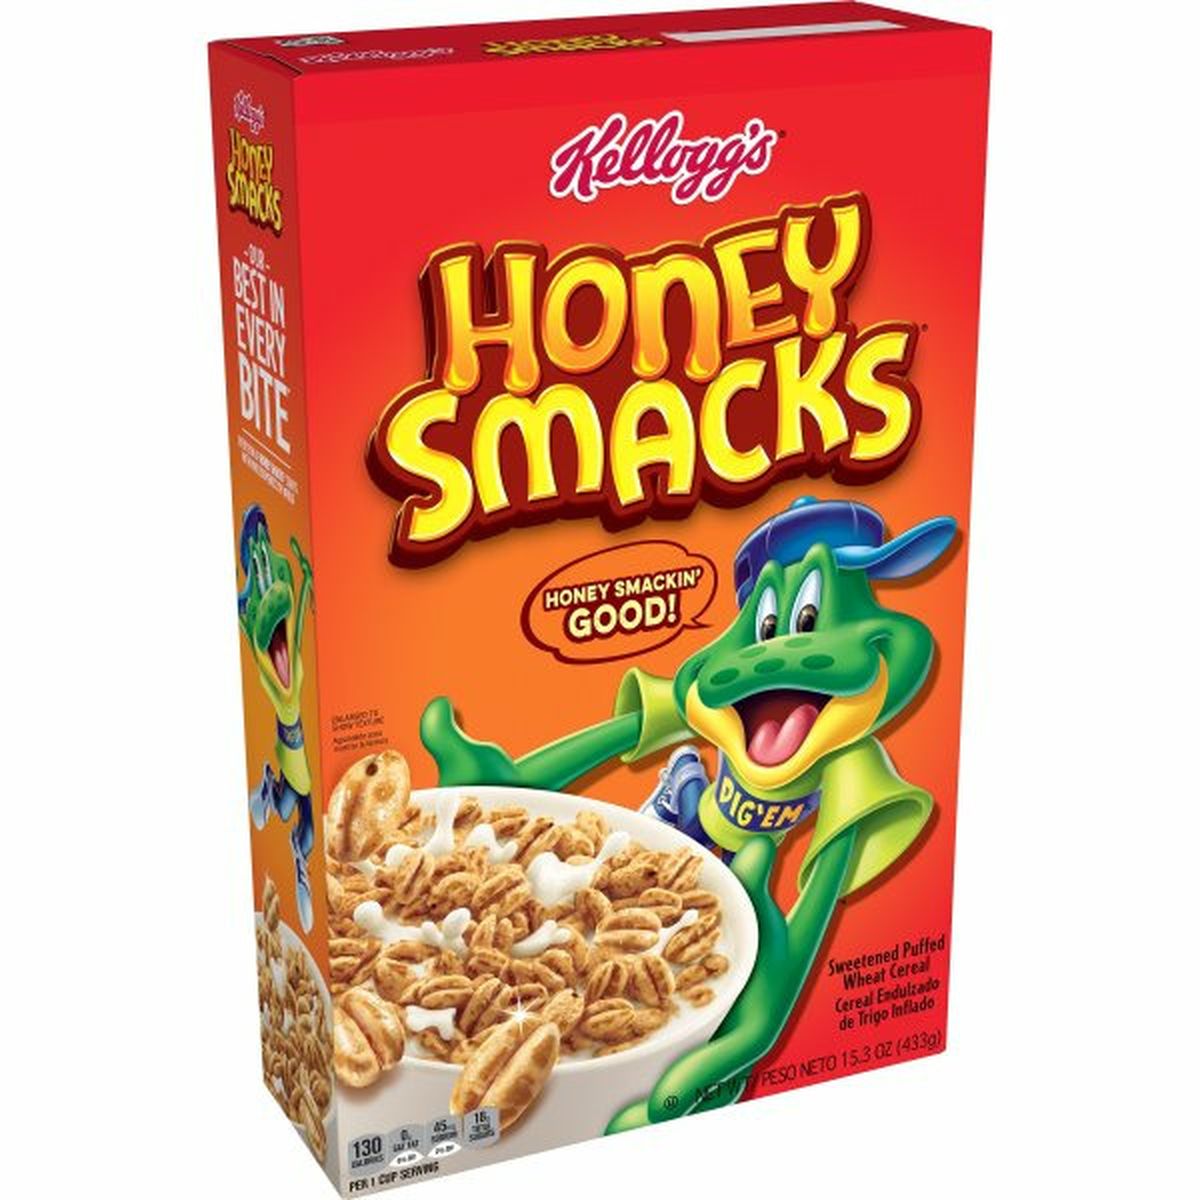 Calories in Kellogg's Honey Smacks Cereal Kellogg's Honey Smacks Breakfast Cereal, Original, Made with Whole Grain, 15.3oz